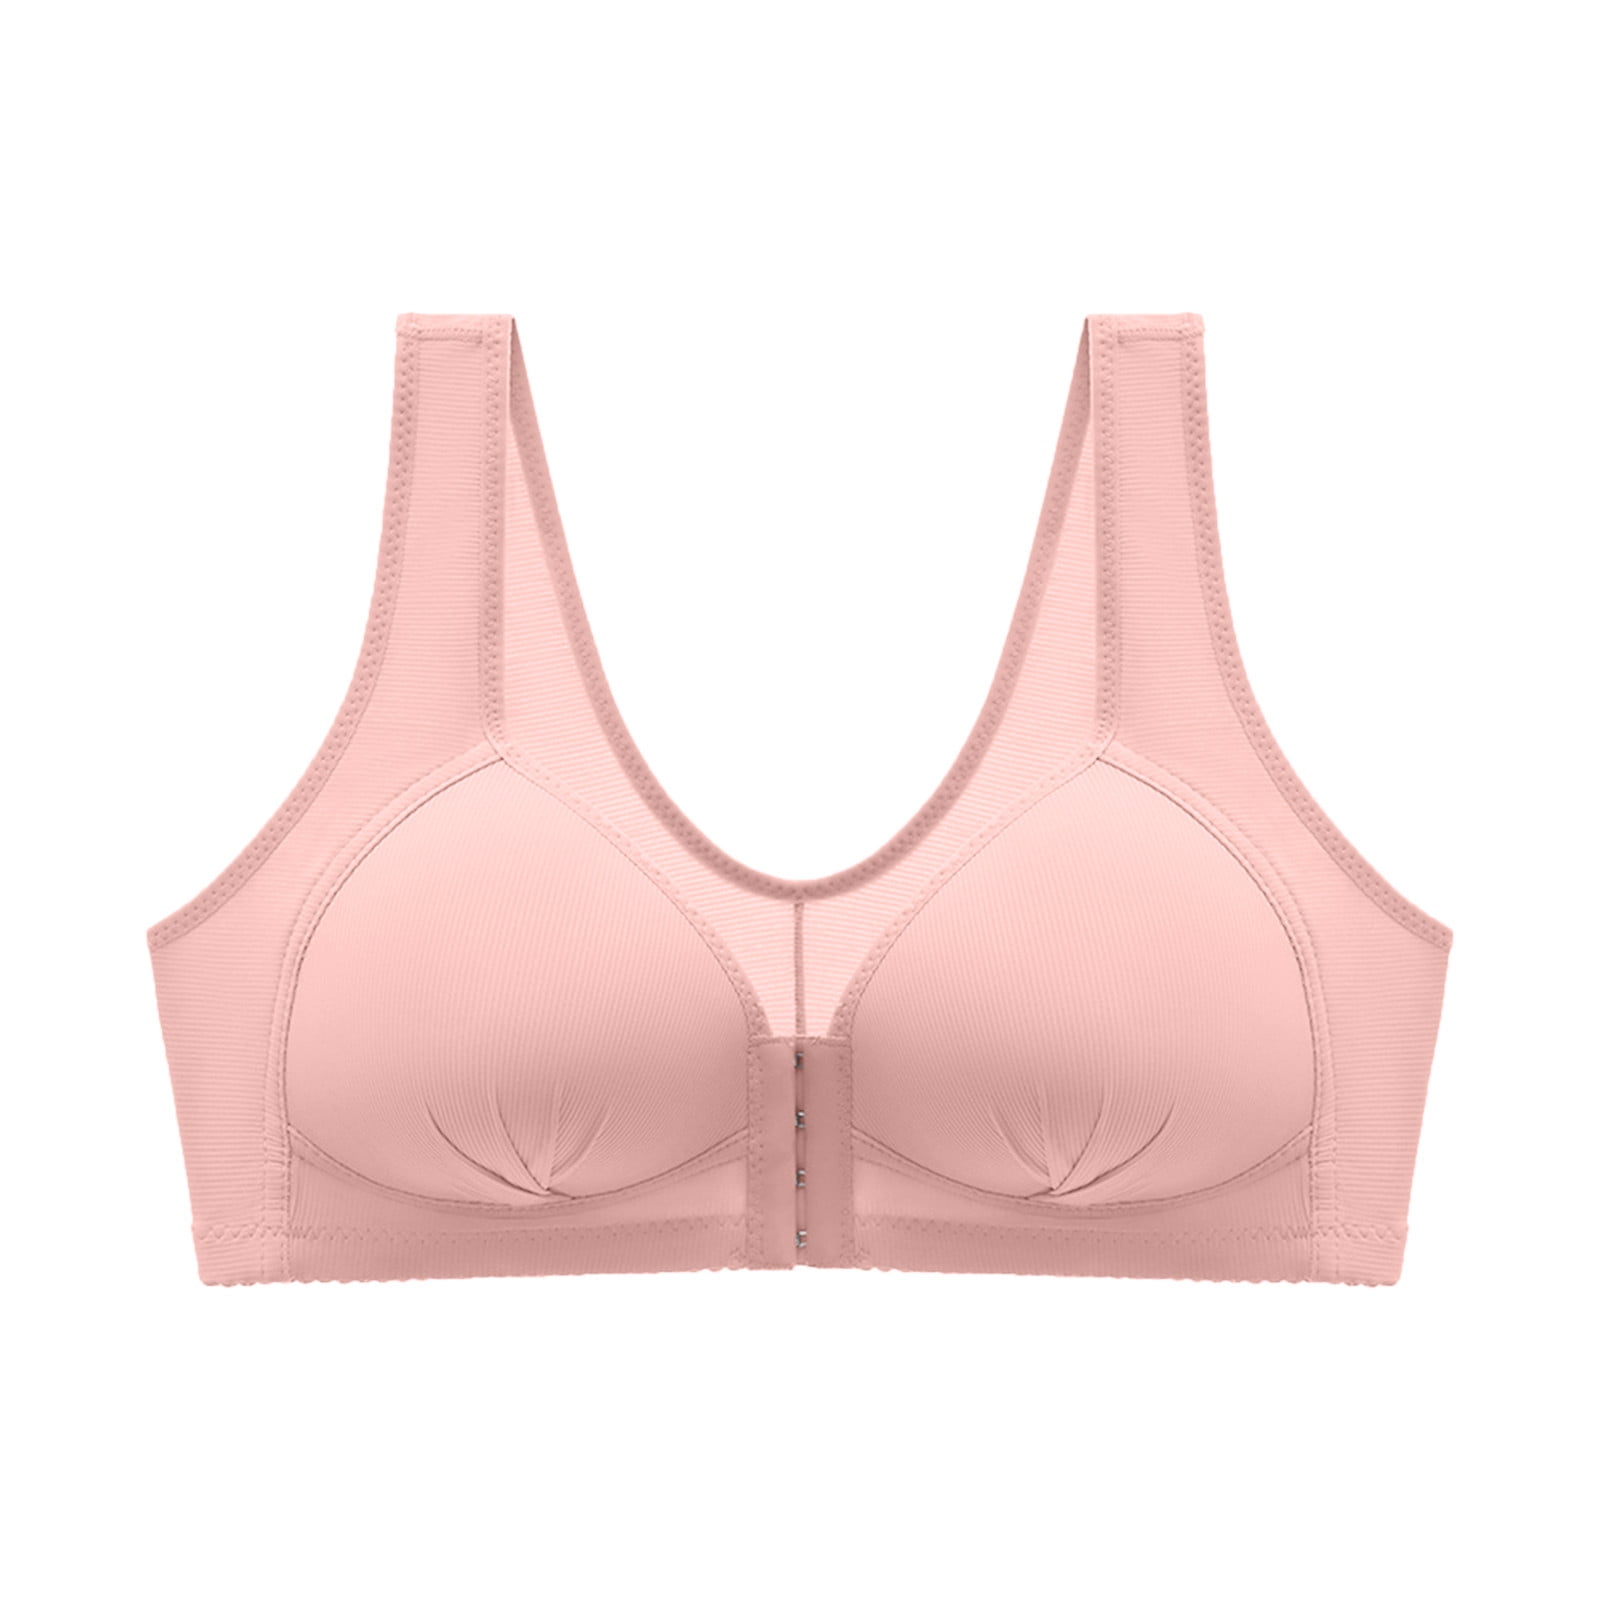 Mrat Clearance Bras for Women Push up with Support No Sweat